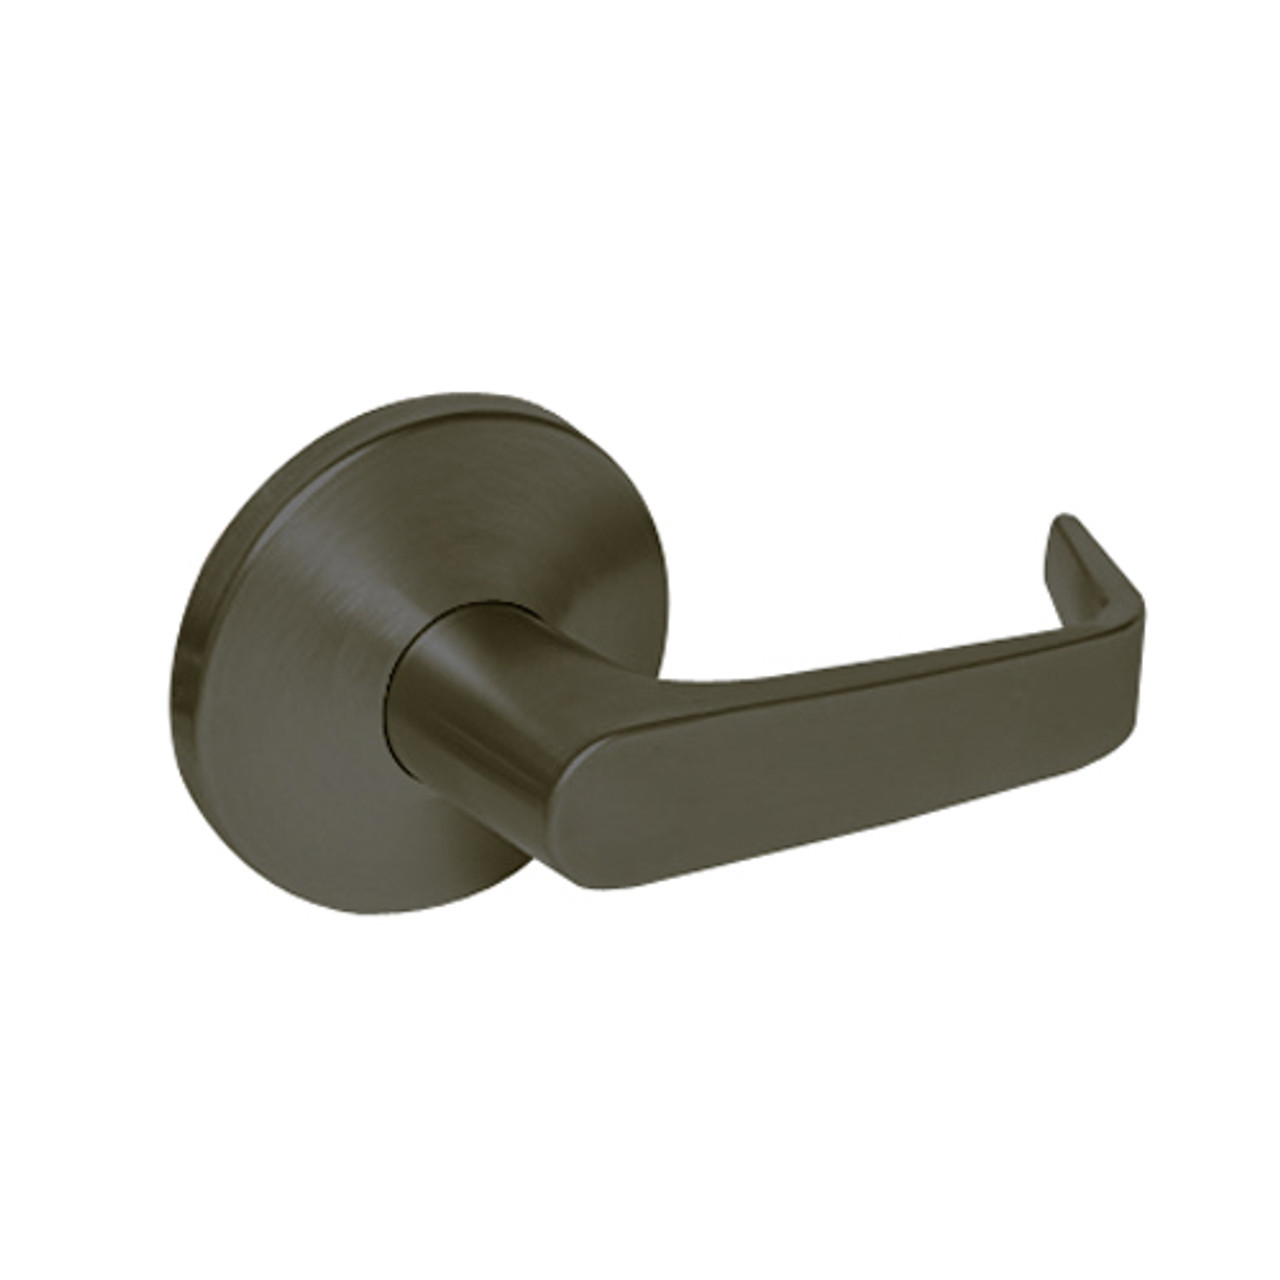 9K30Z15LS3613LM Best 9K Series Closet Heavy Duty Cylindrical Lever Locks with Contour Angle with Return Lever Design in Oil Rubbed Bronze